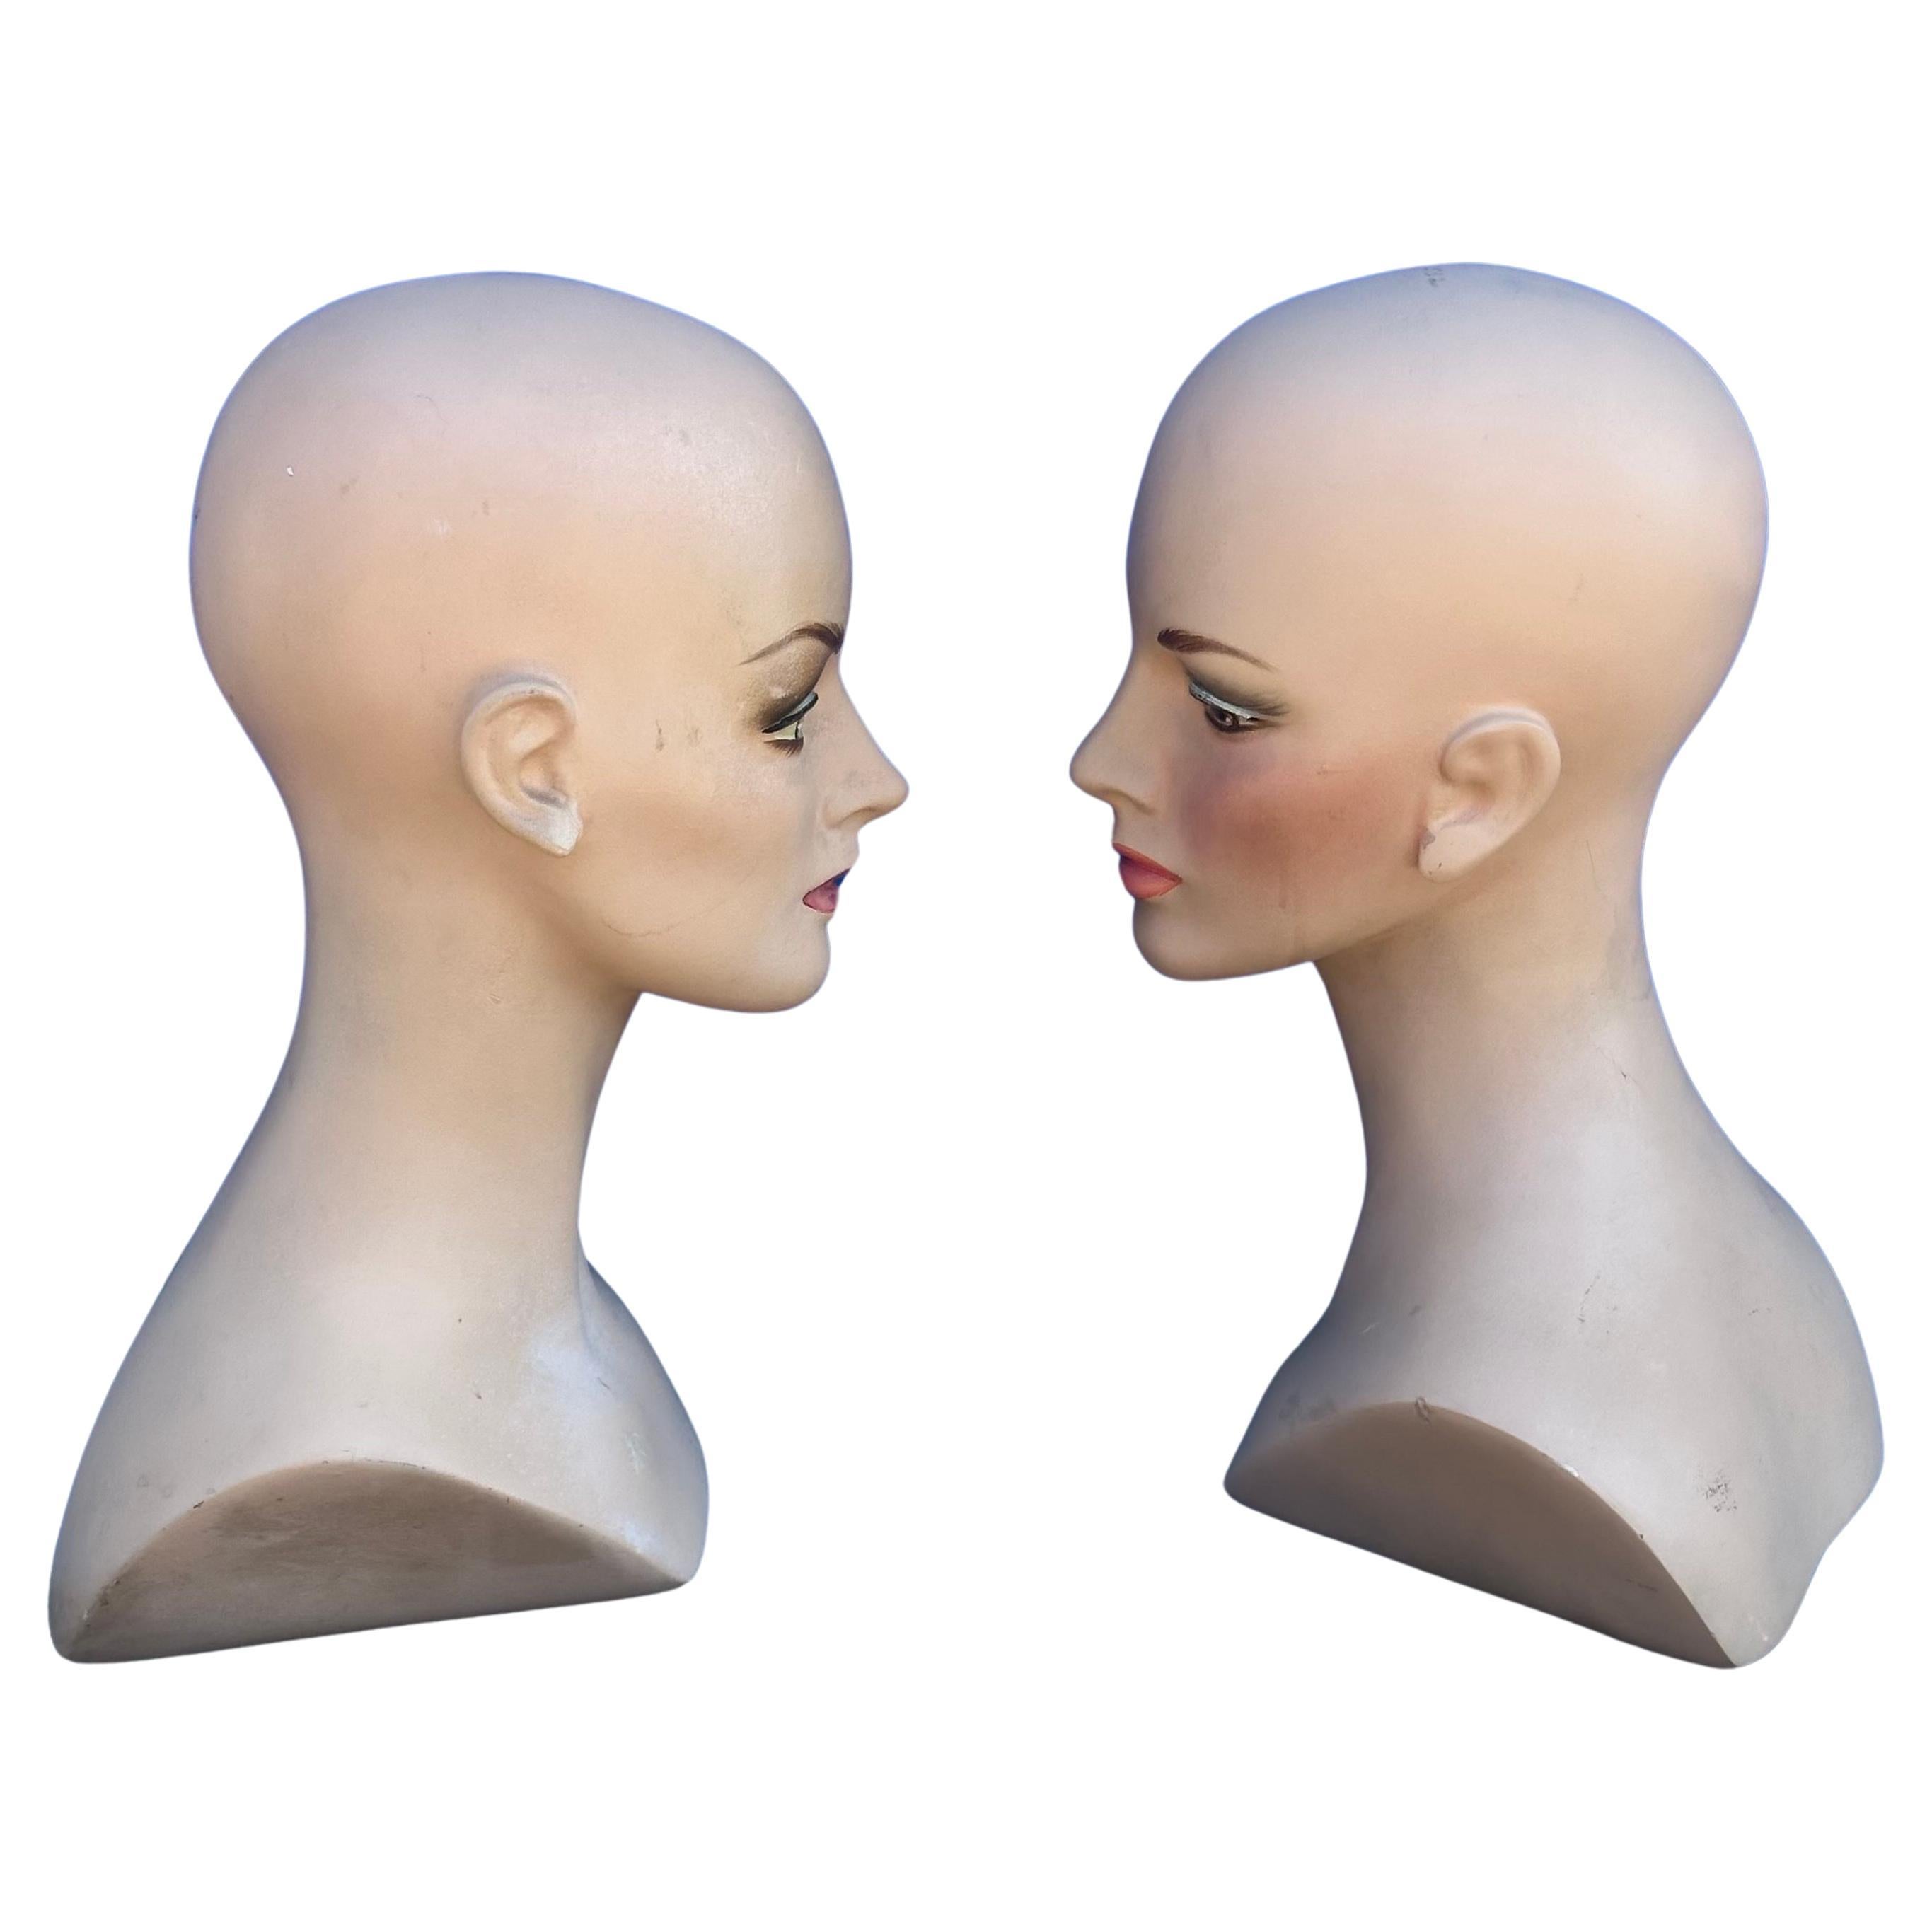 A nice pair of vintage art deco mannequin heads / busts / wig models, circa 1930s.  The pair are in very good vinatage condition and measure 9